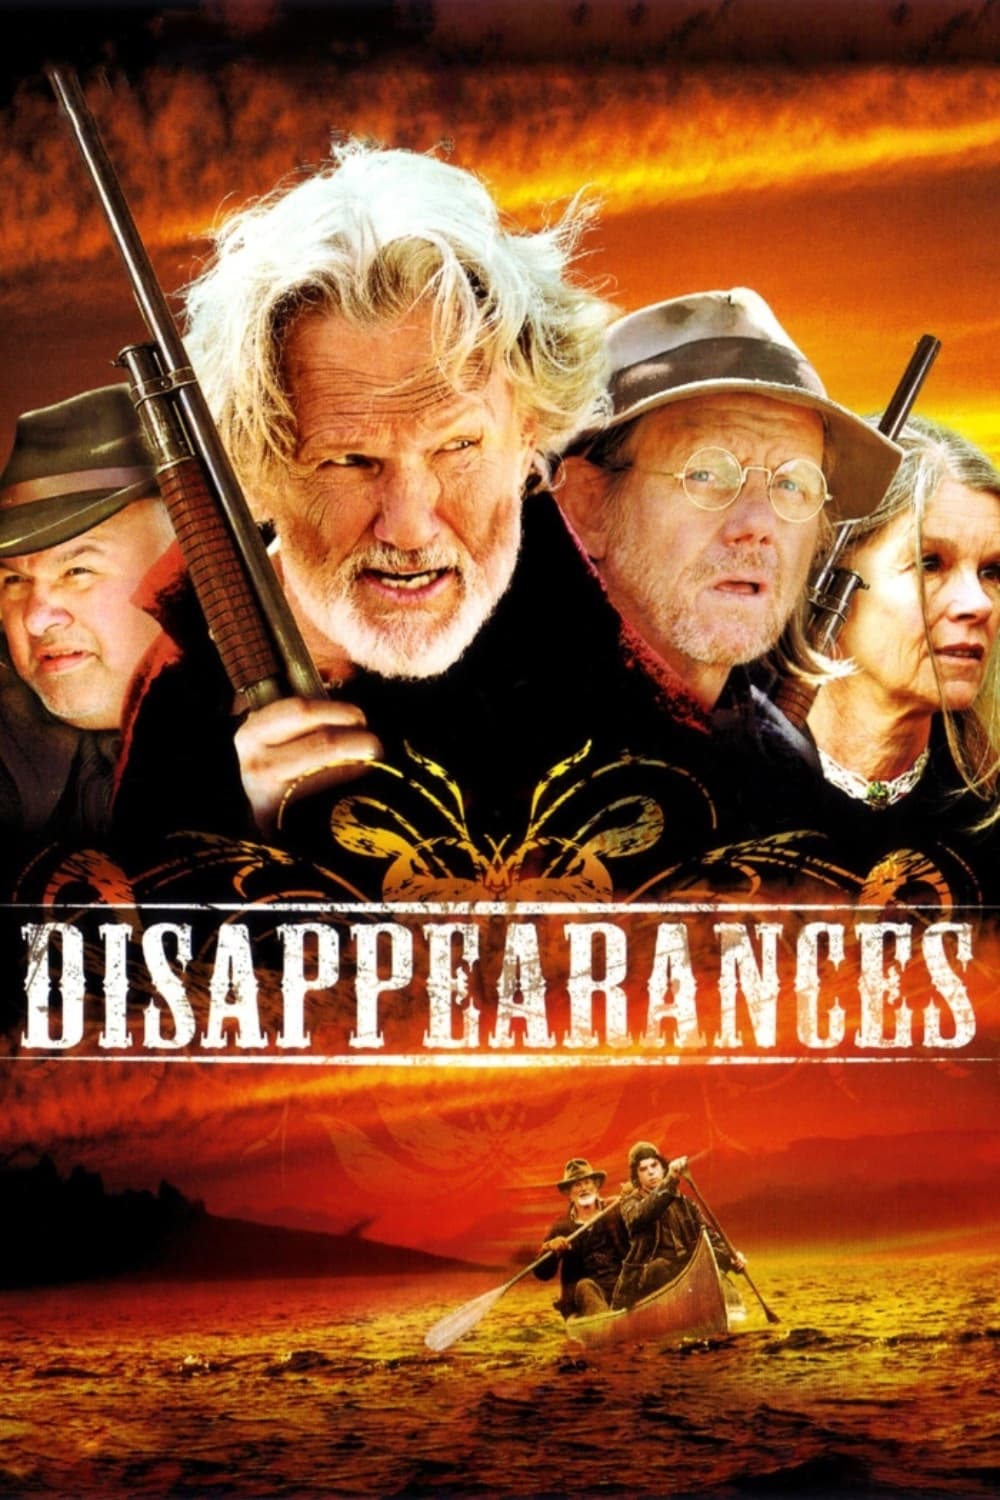 Disappearances (2007)